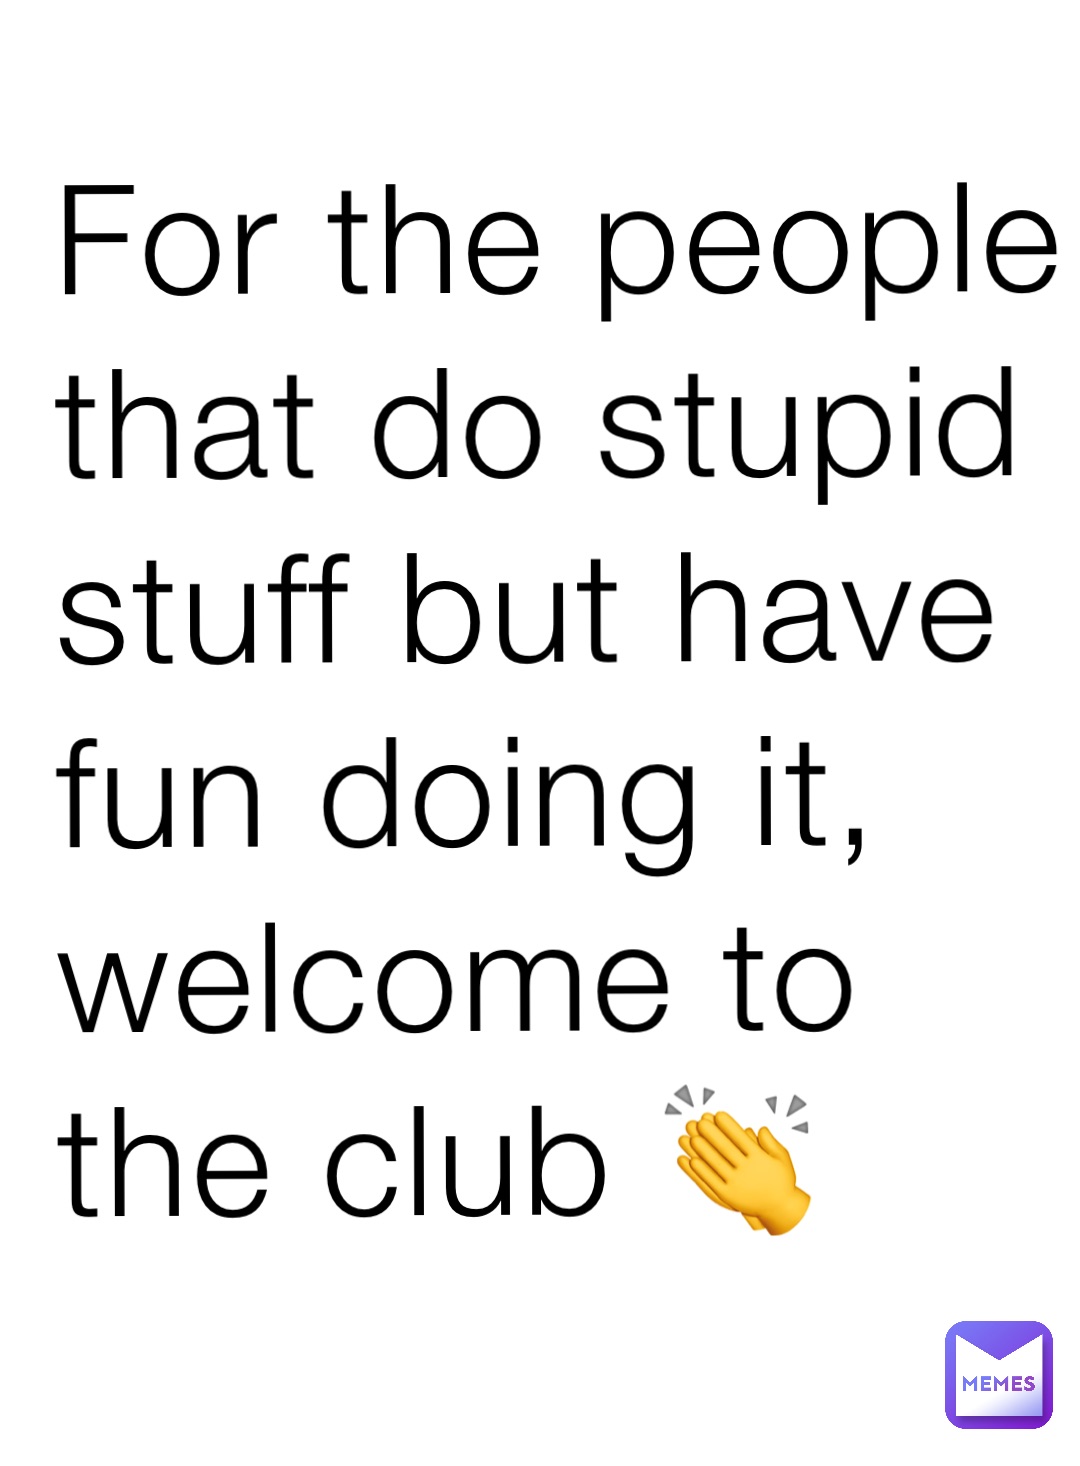 For the people that do stupid stuff but have fun doing it, welcome to the club 👏